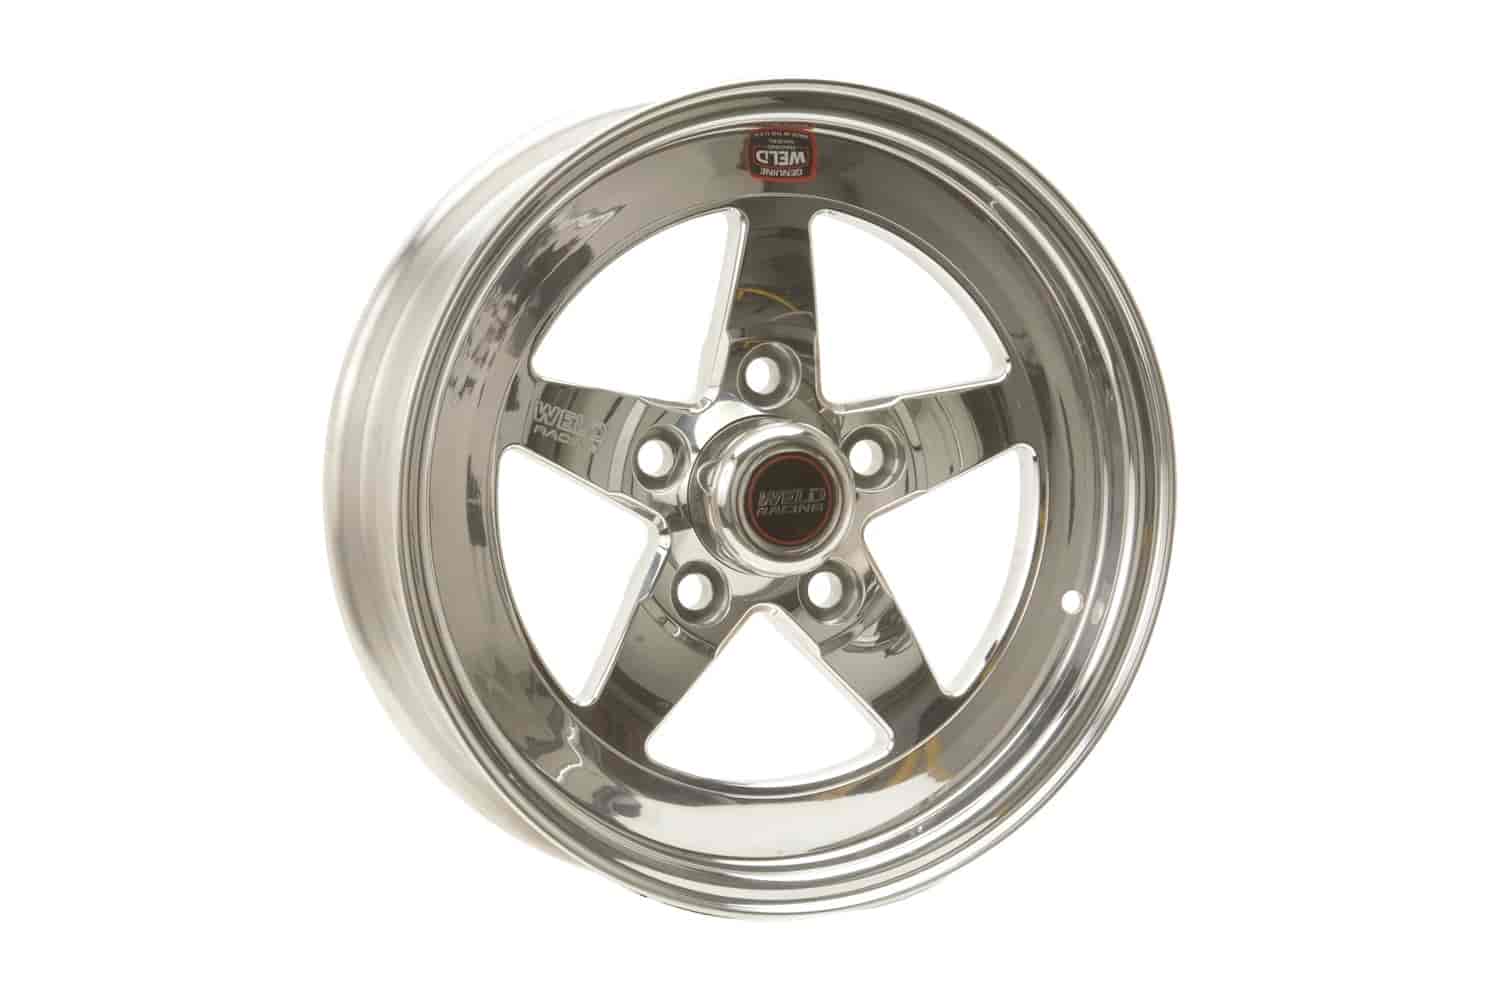 RT-S Series Wheel Size: 15" x 10" Bolt Circle: 5 x 4-3/4" Back Space: 5-1/2"